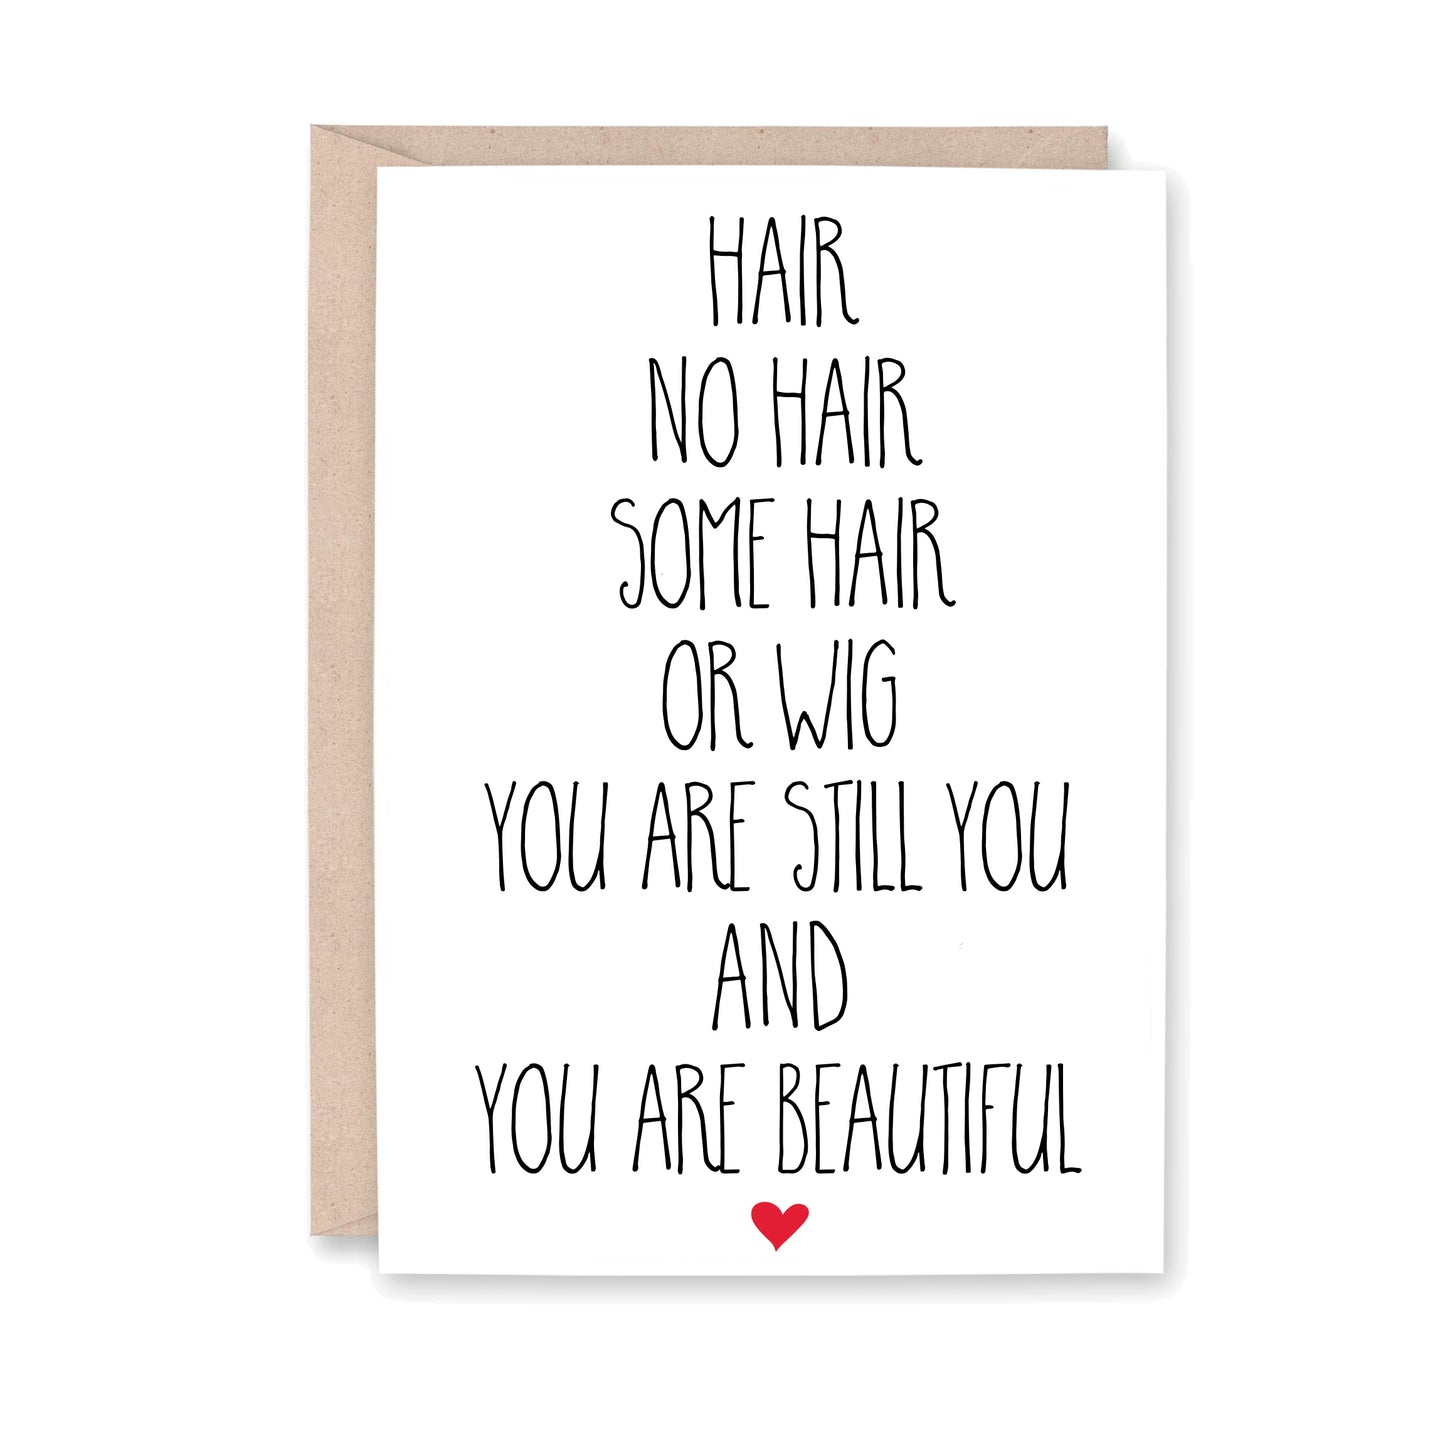 greeting card with a small red heart at the bottom that says, "Hair no hair some hair or wig, you are still you and you are beautiful"